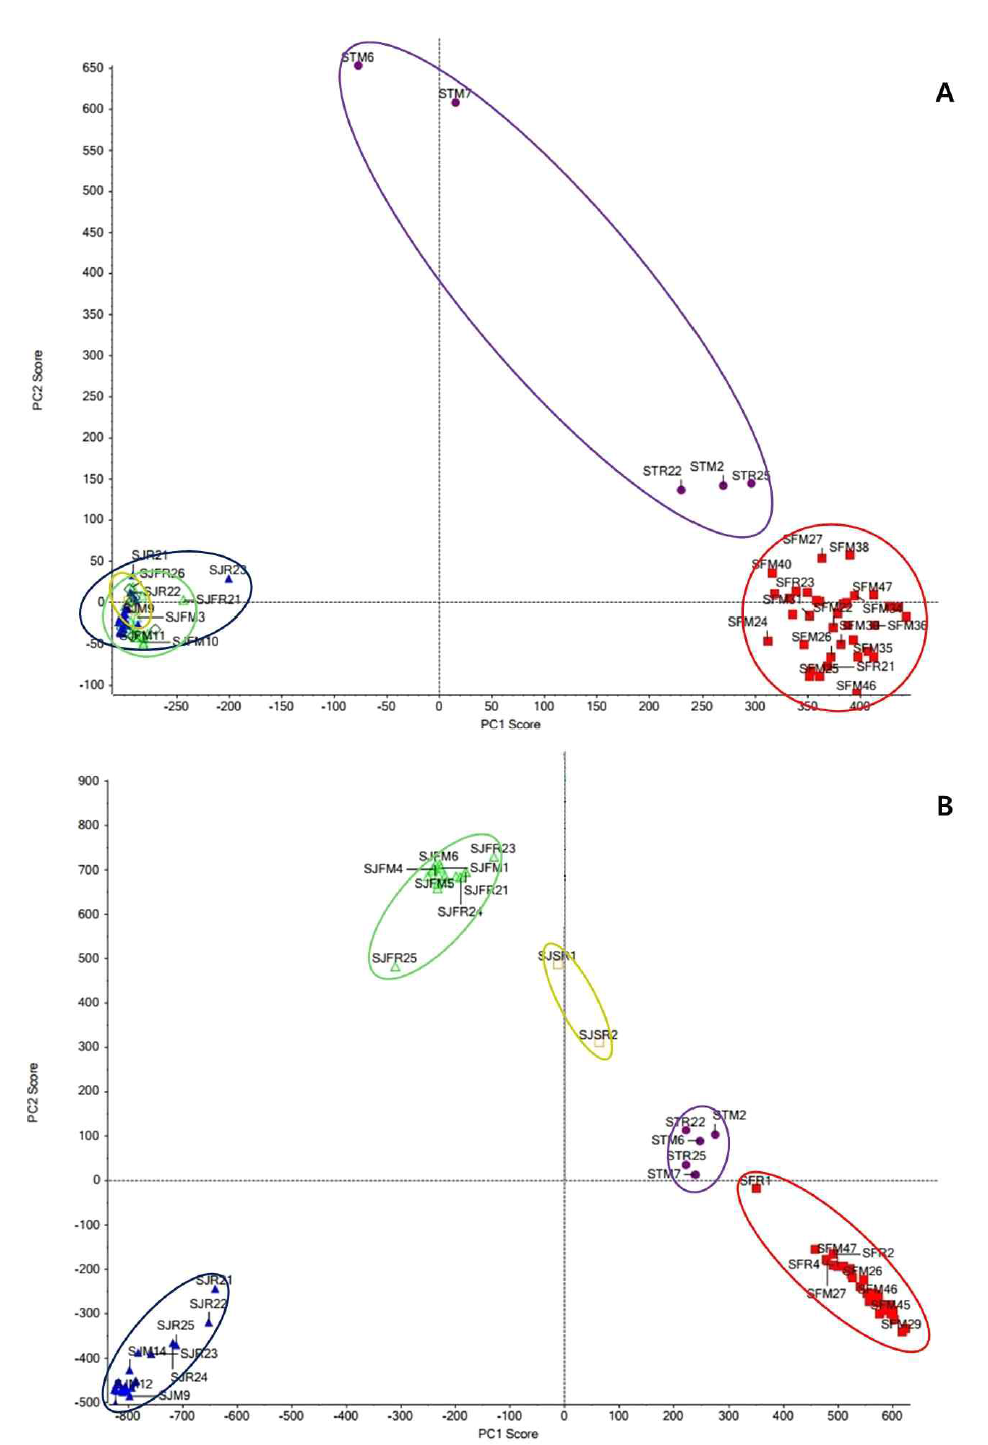 Score plots from principal component analysis (PCA) based on method A and B data of genus Sophora. The root of Sophora flavescens: SF (■); the fruit of Sophora japonica: SJ (▲); the flower of Sophora japonica: SJF (△); the stem of Sophora japonica: SJS (□); the root of Sophora tonkinensis: ST (●)